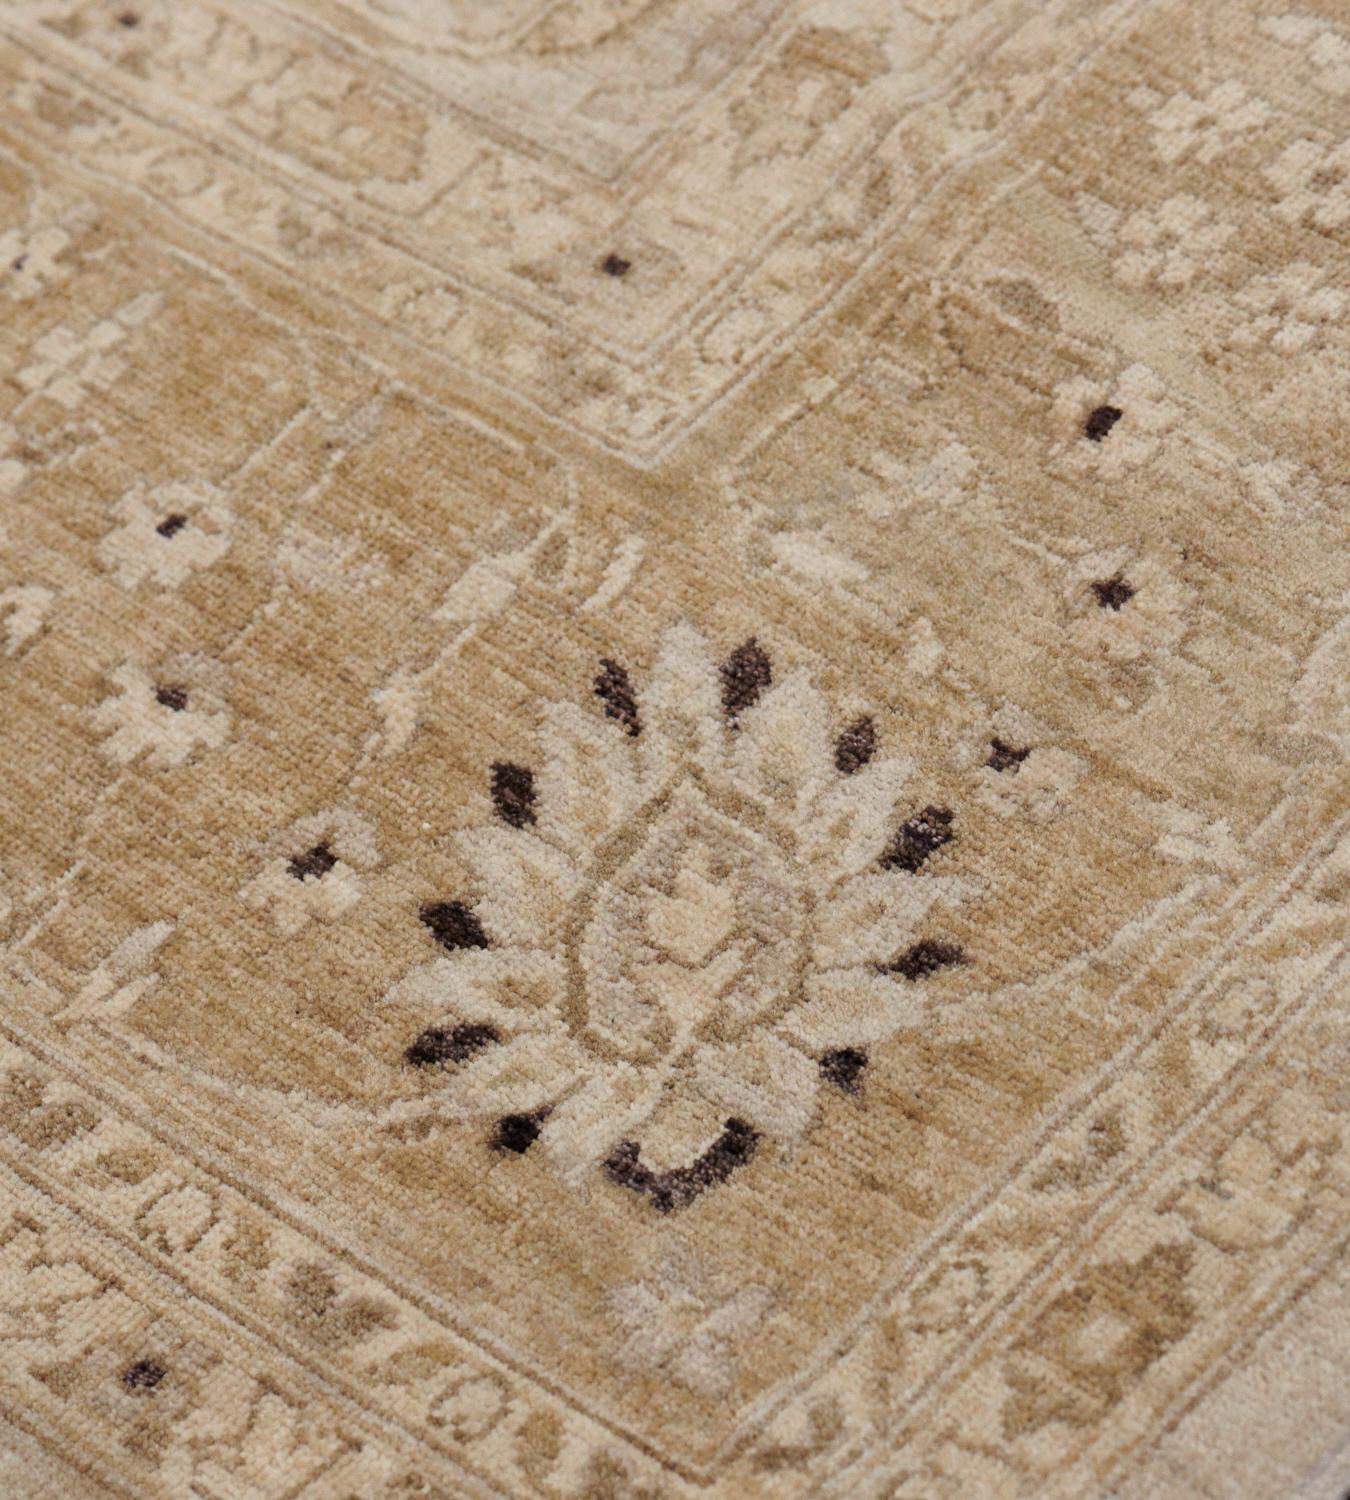 This handwoven reproduction Indian Agra rug has an overall beige field with tonal wandering palmette vines issuing fine floral motif, issued by a central suggested cusped lozenge, in a fox brown palmette vine border, between elegant complementary